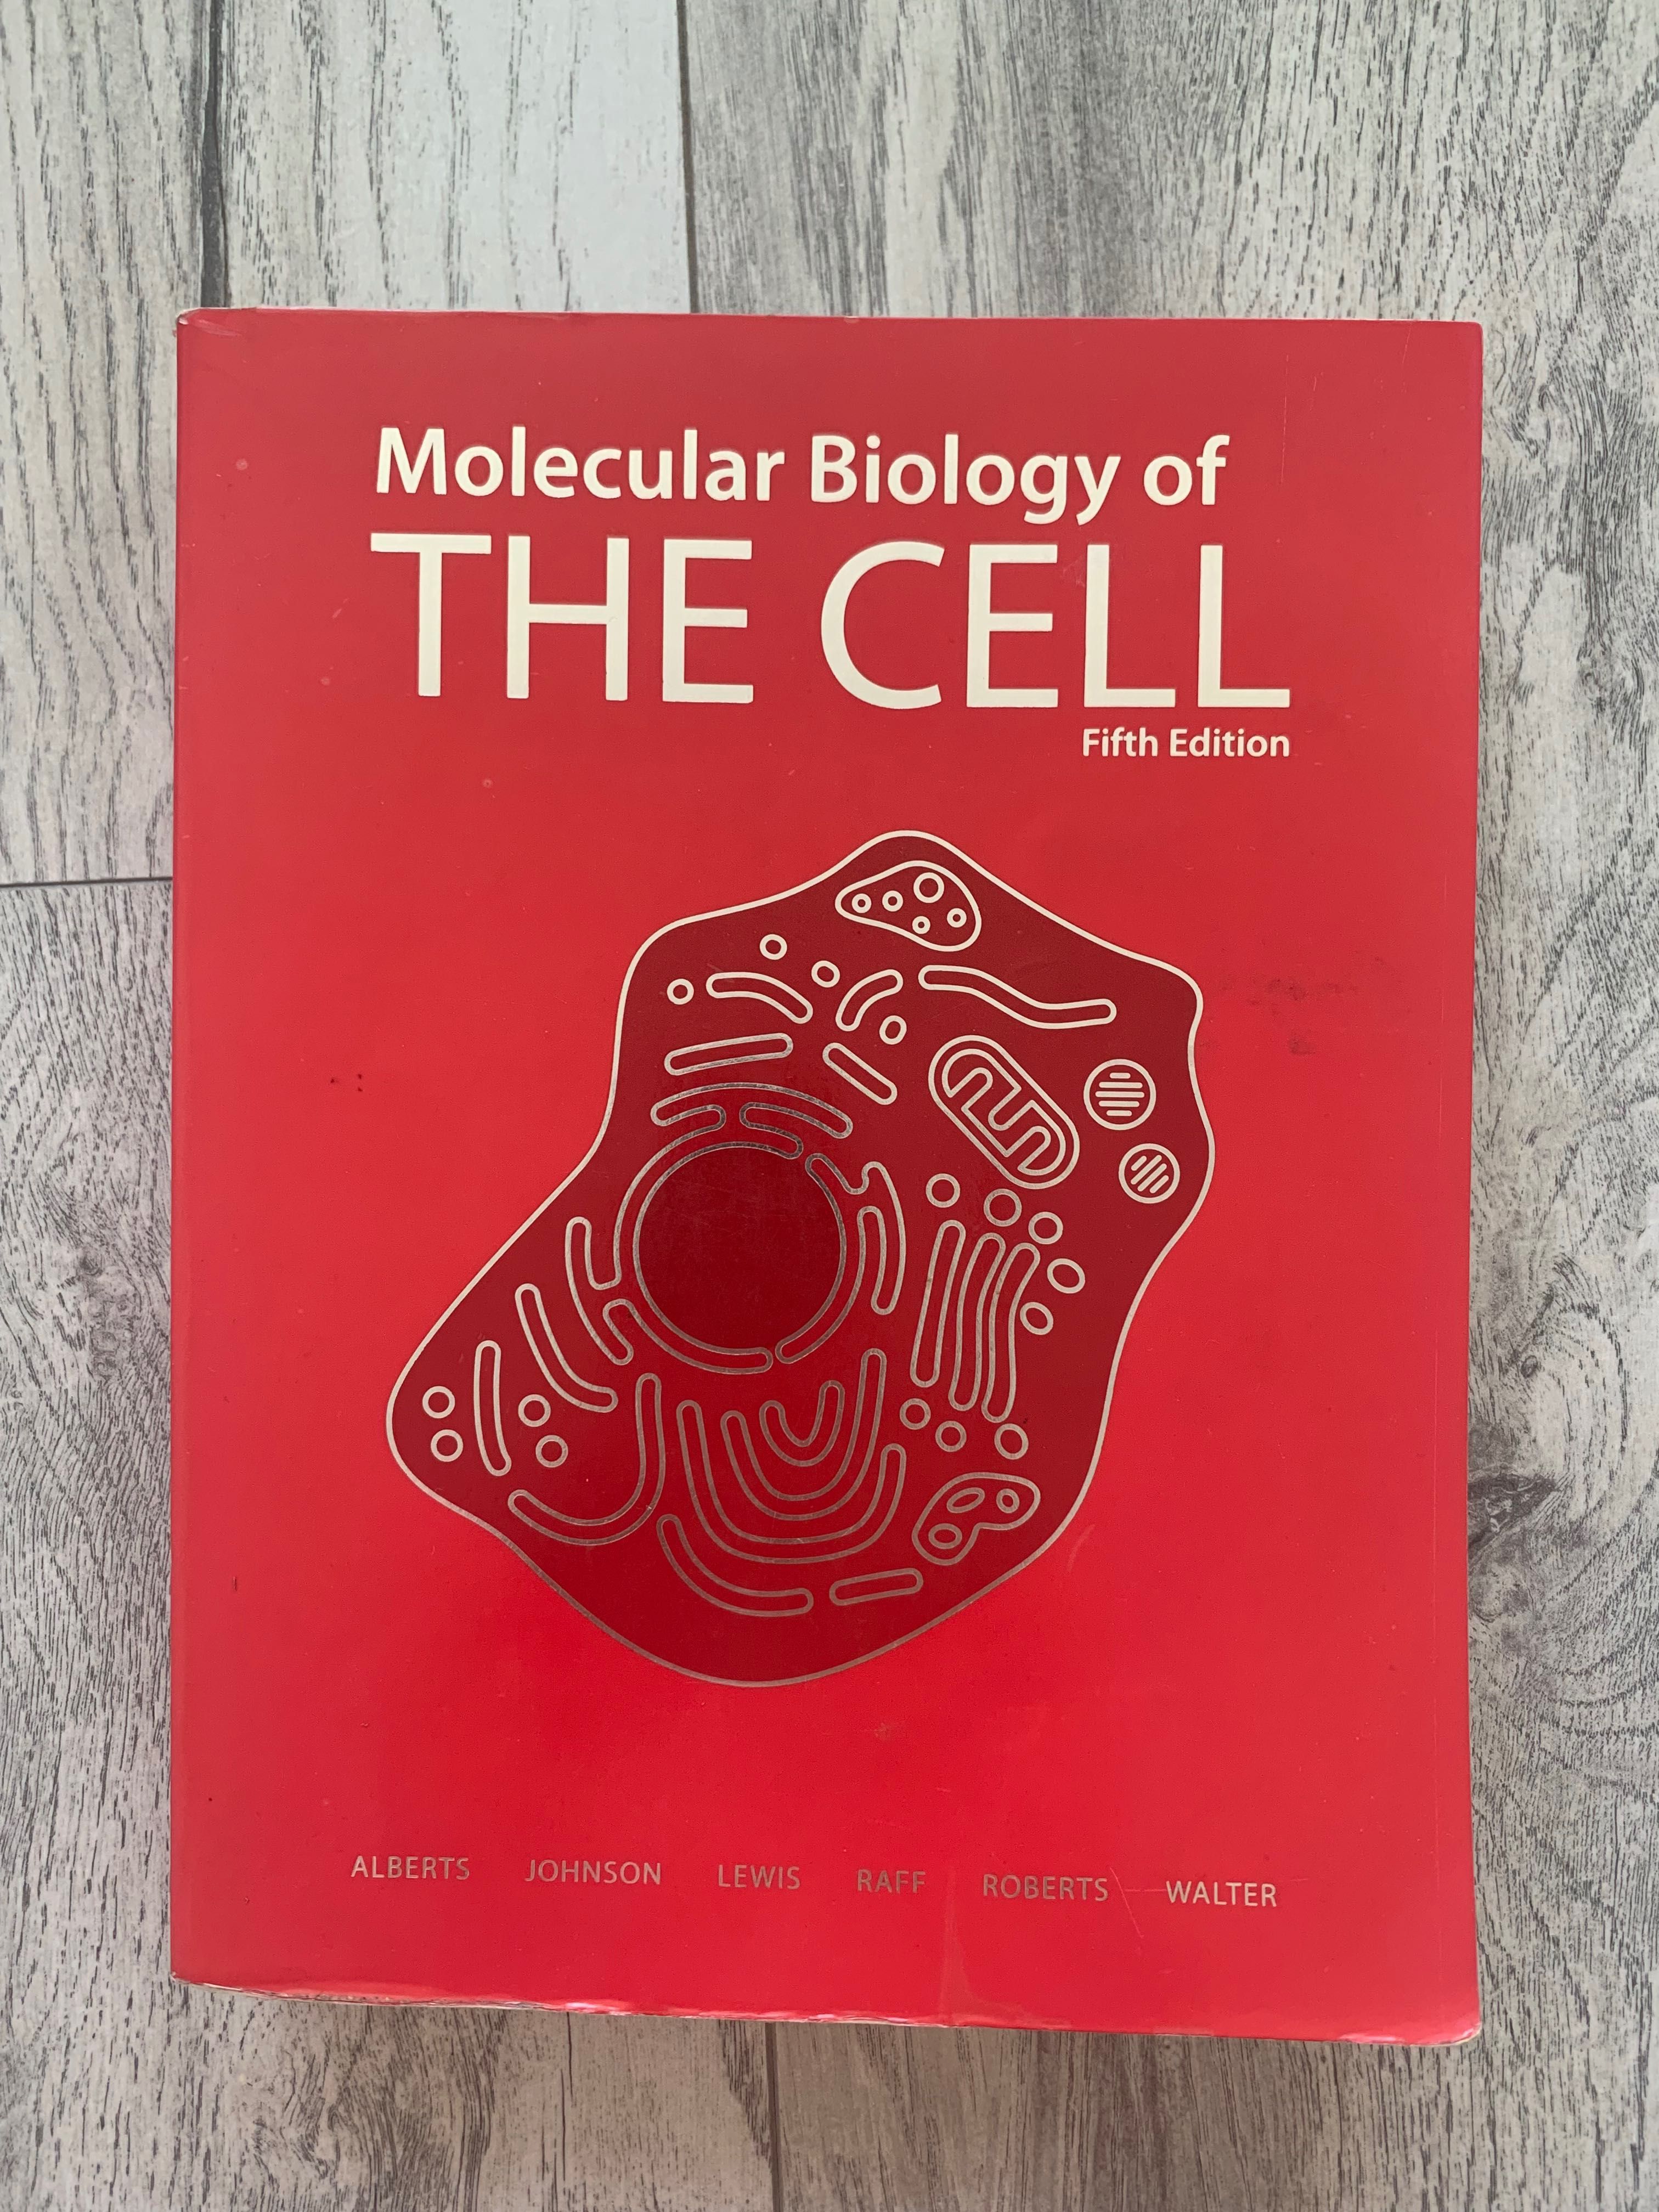 Molecular biology of THE CELL 5th edition